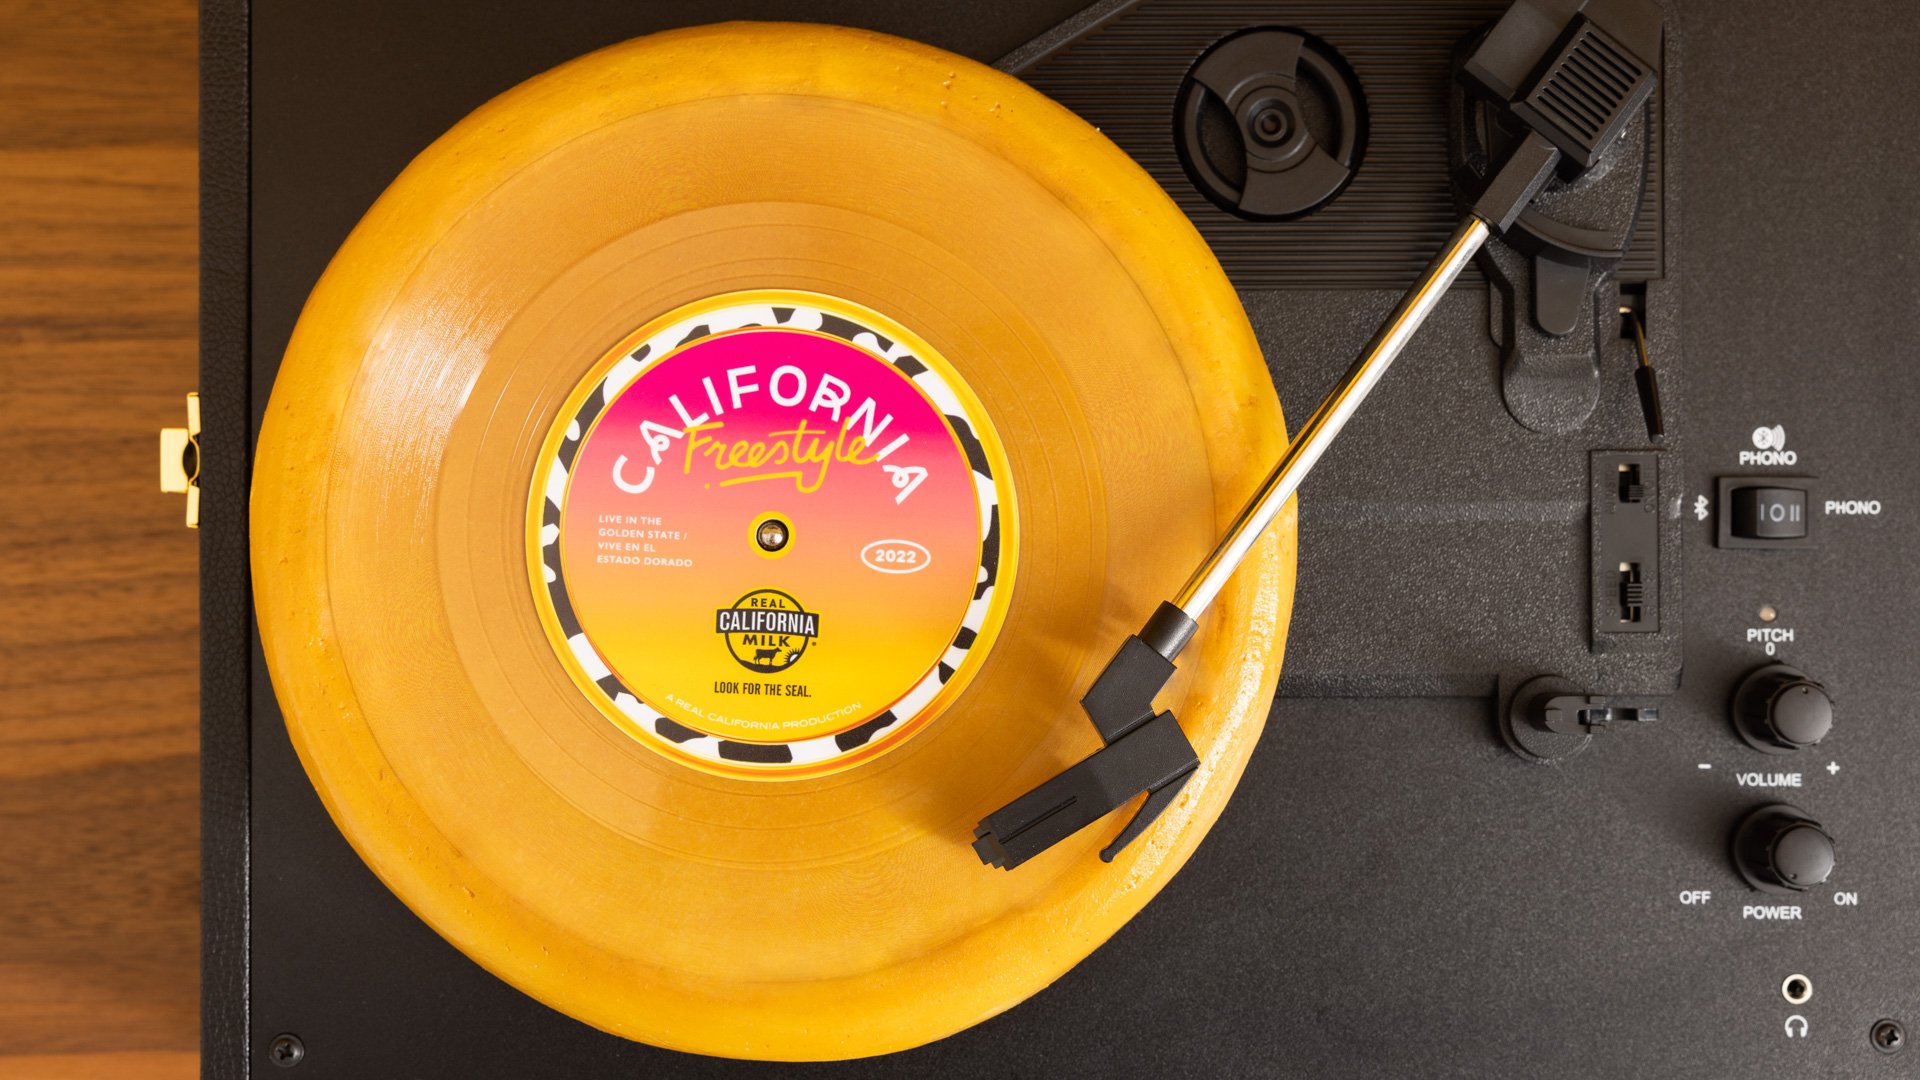 California Freestyle record made of cheese 